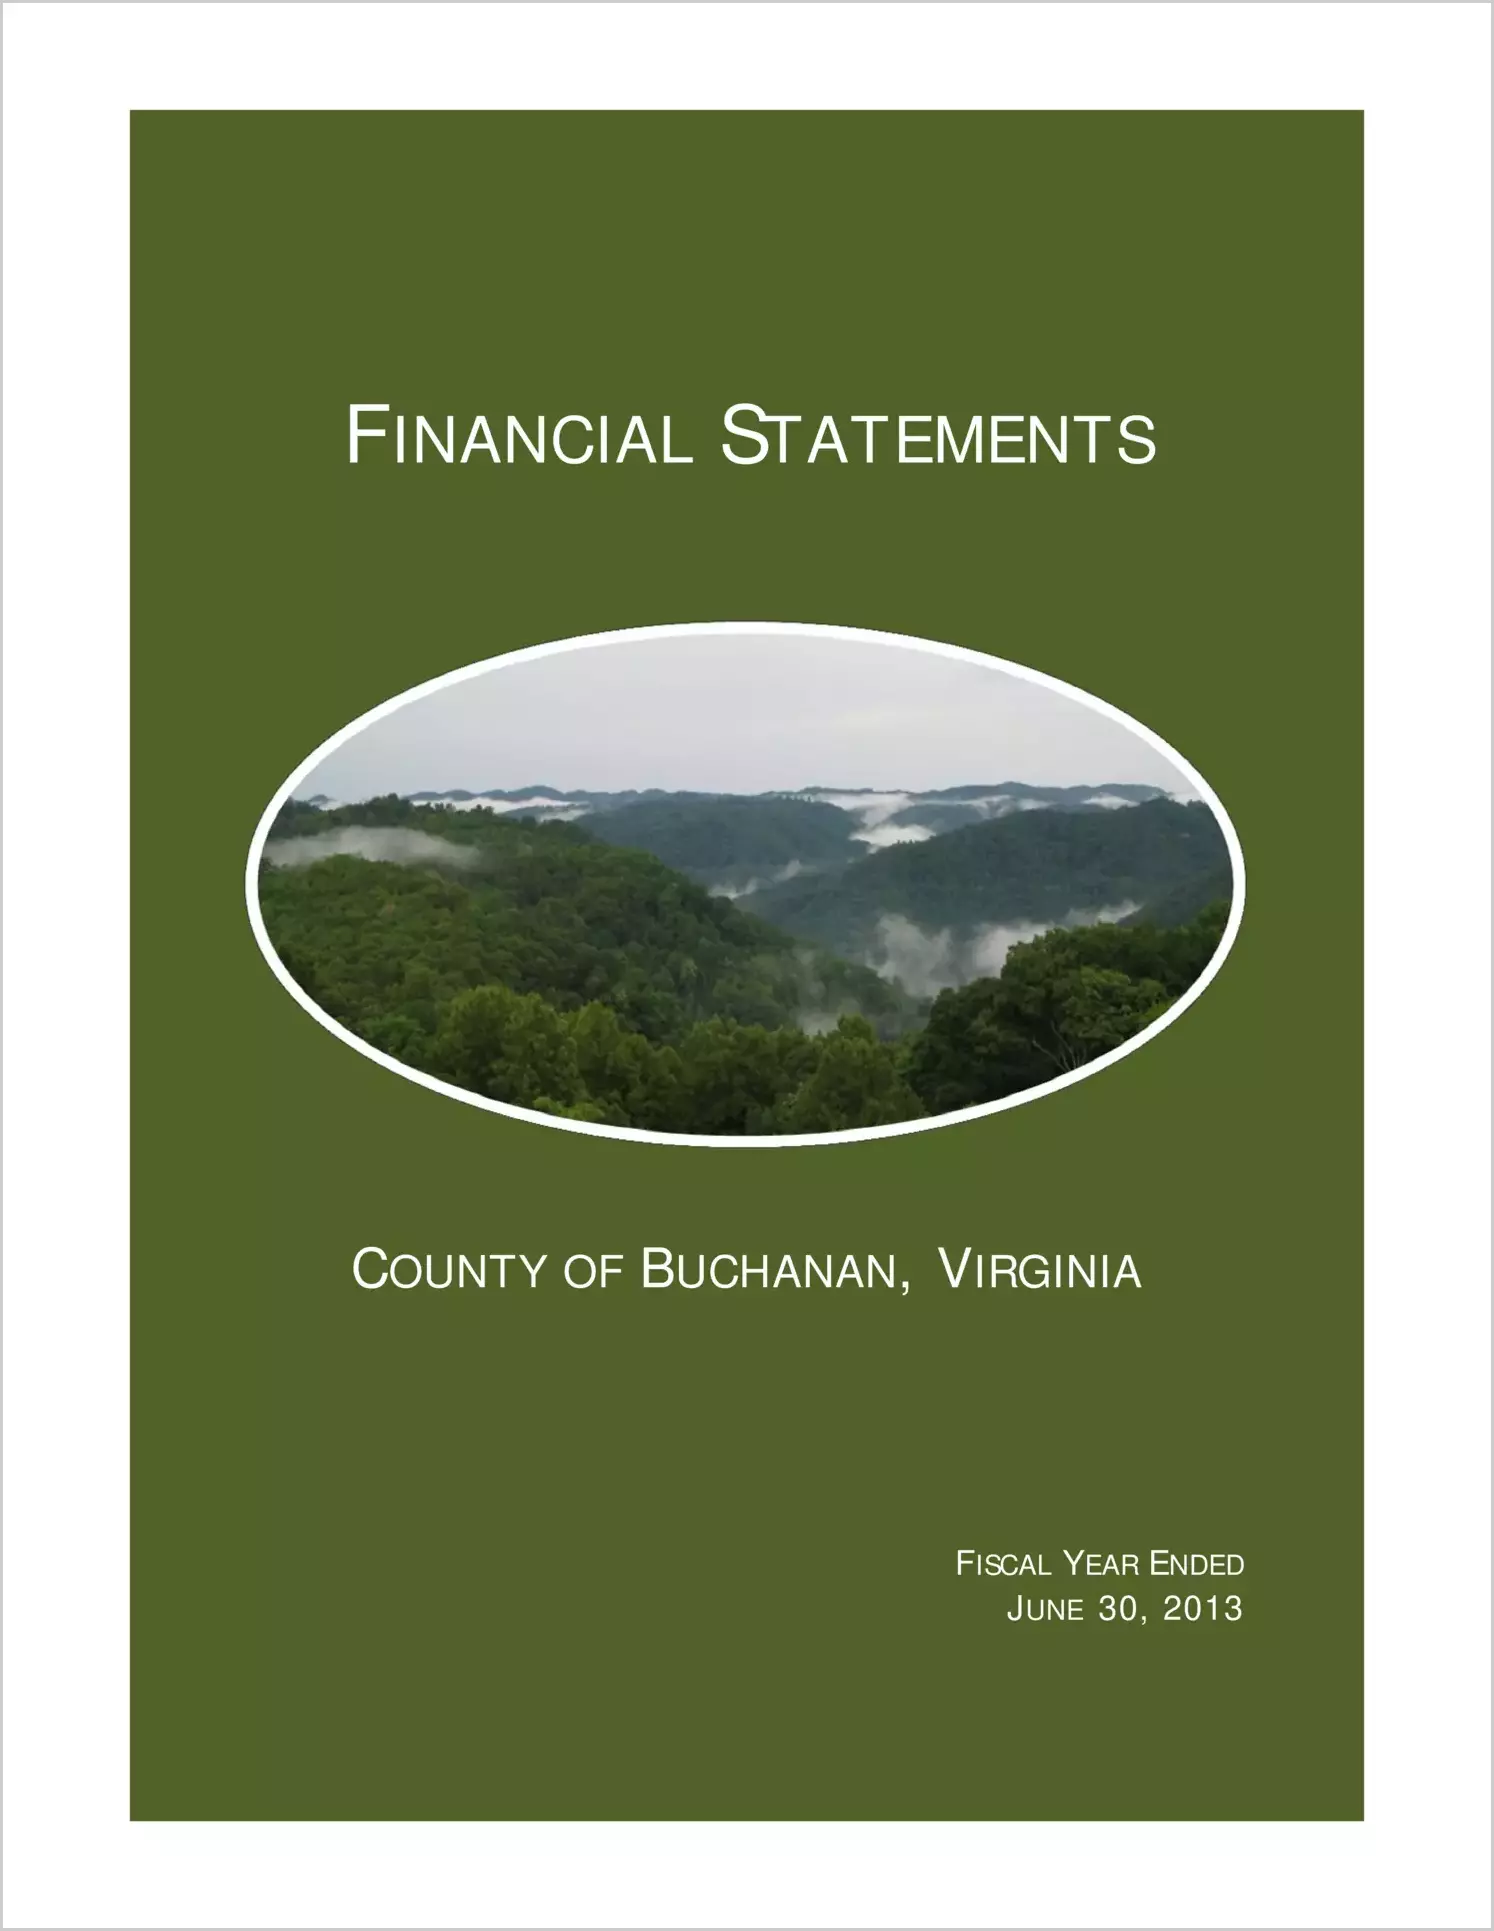 2013 Annual Financial Report for County of Buchanan